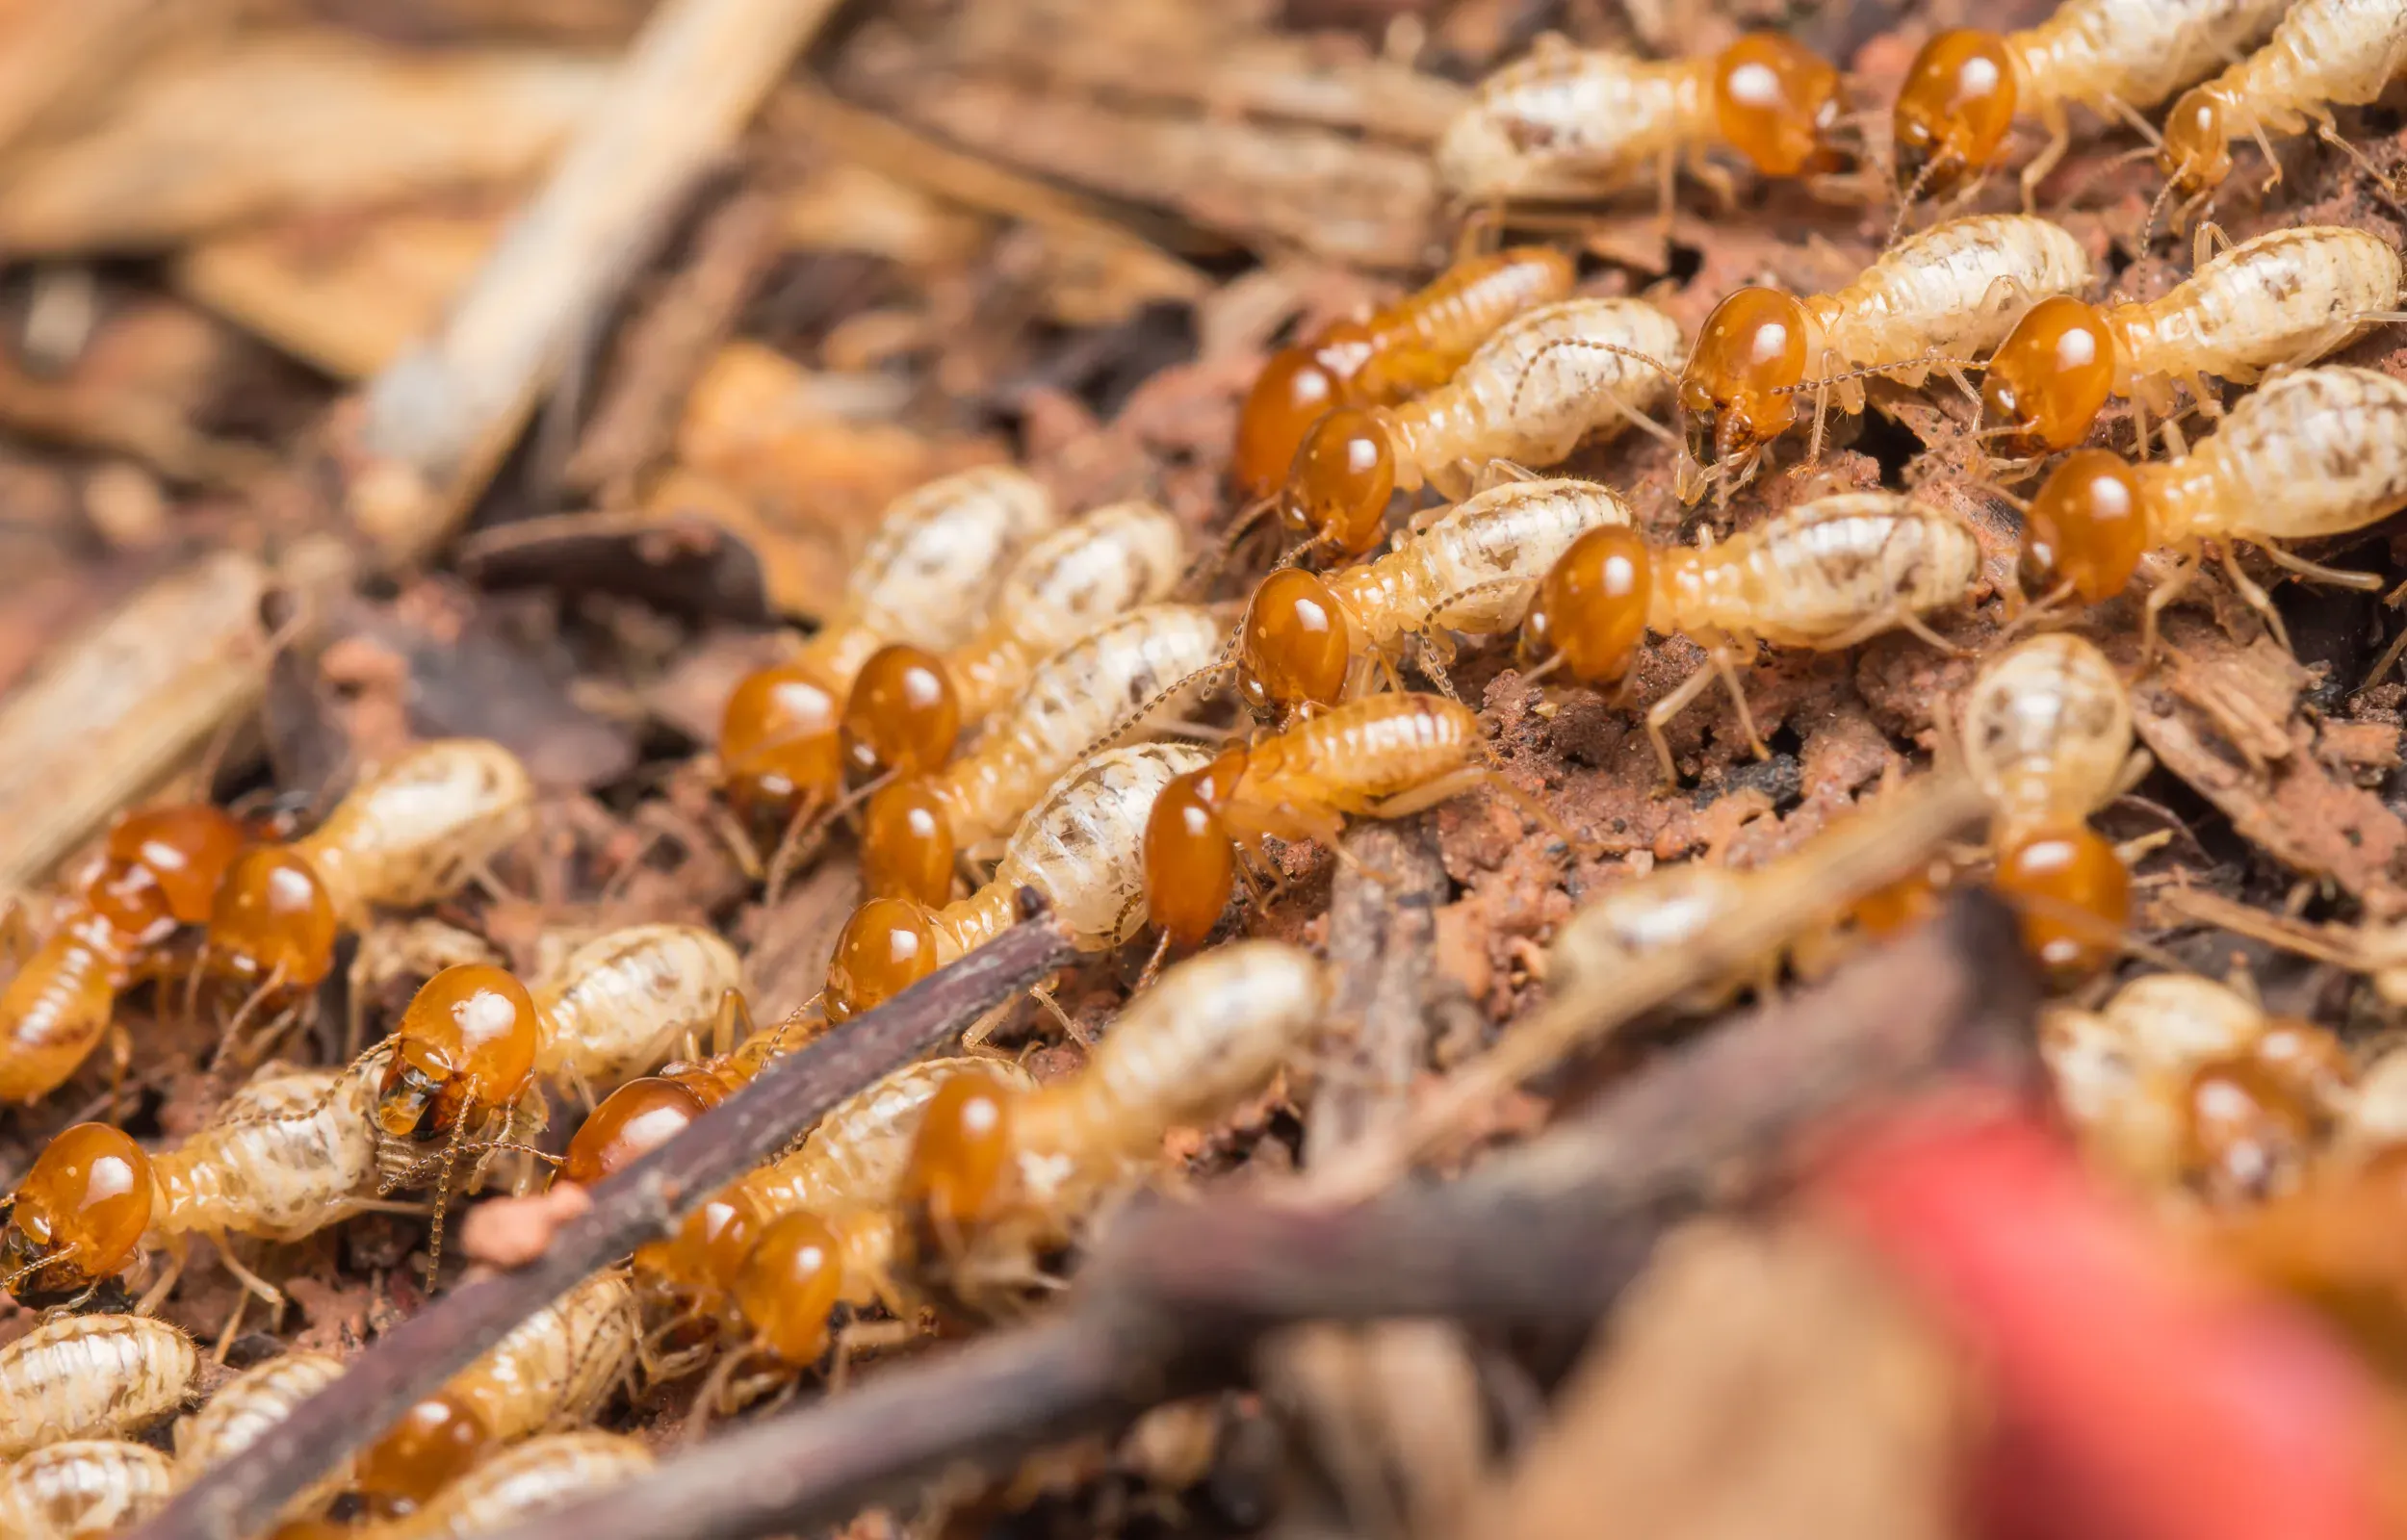 Close-up of termites on wood, highlighting the necessity of comprehensive Lake Nona termite control services to protect homes from infestations and structural damage.